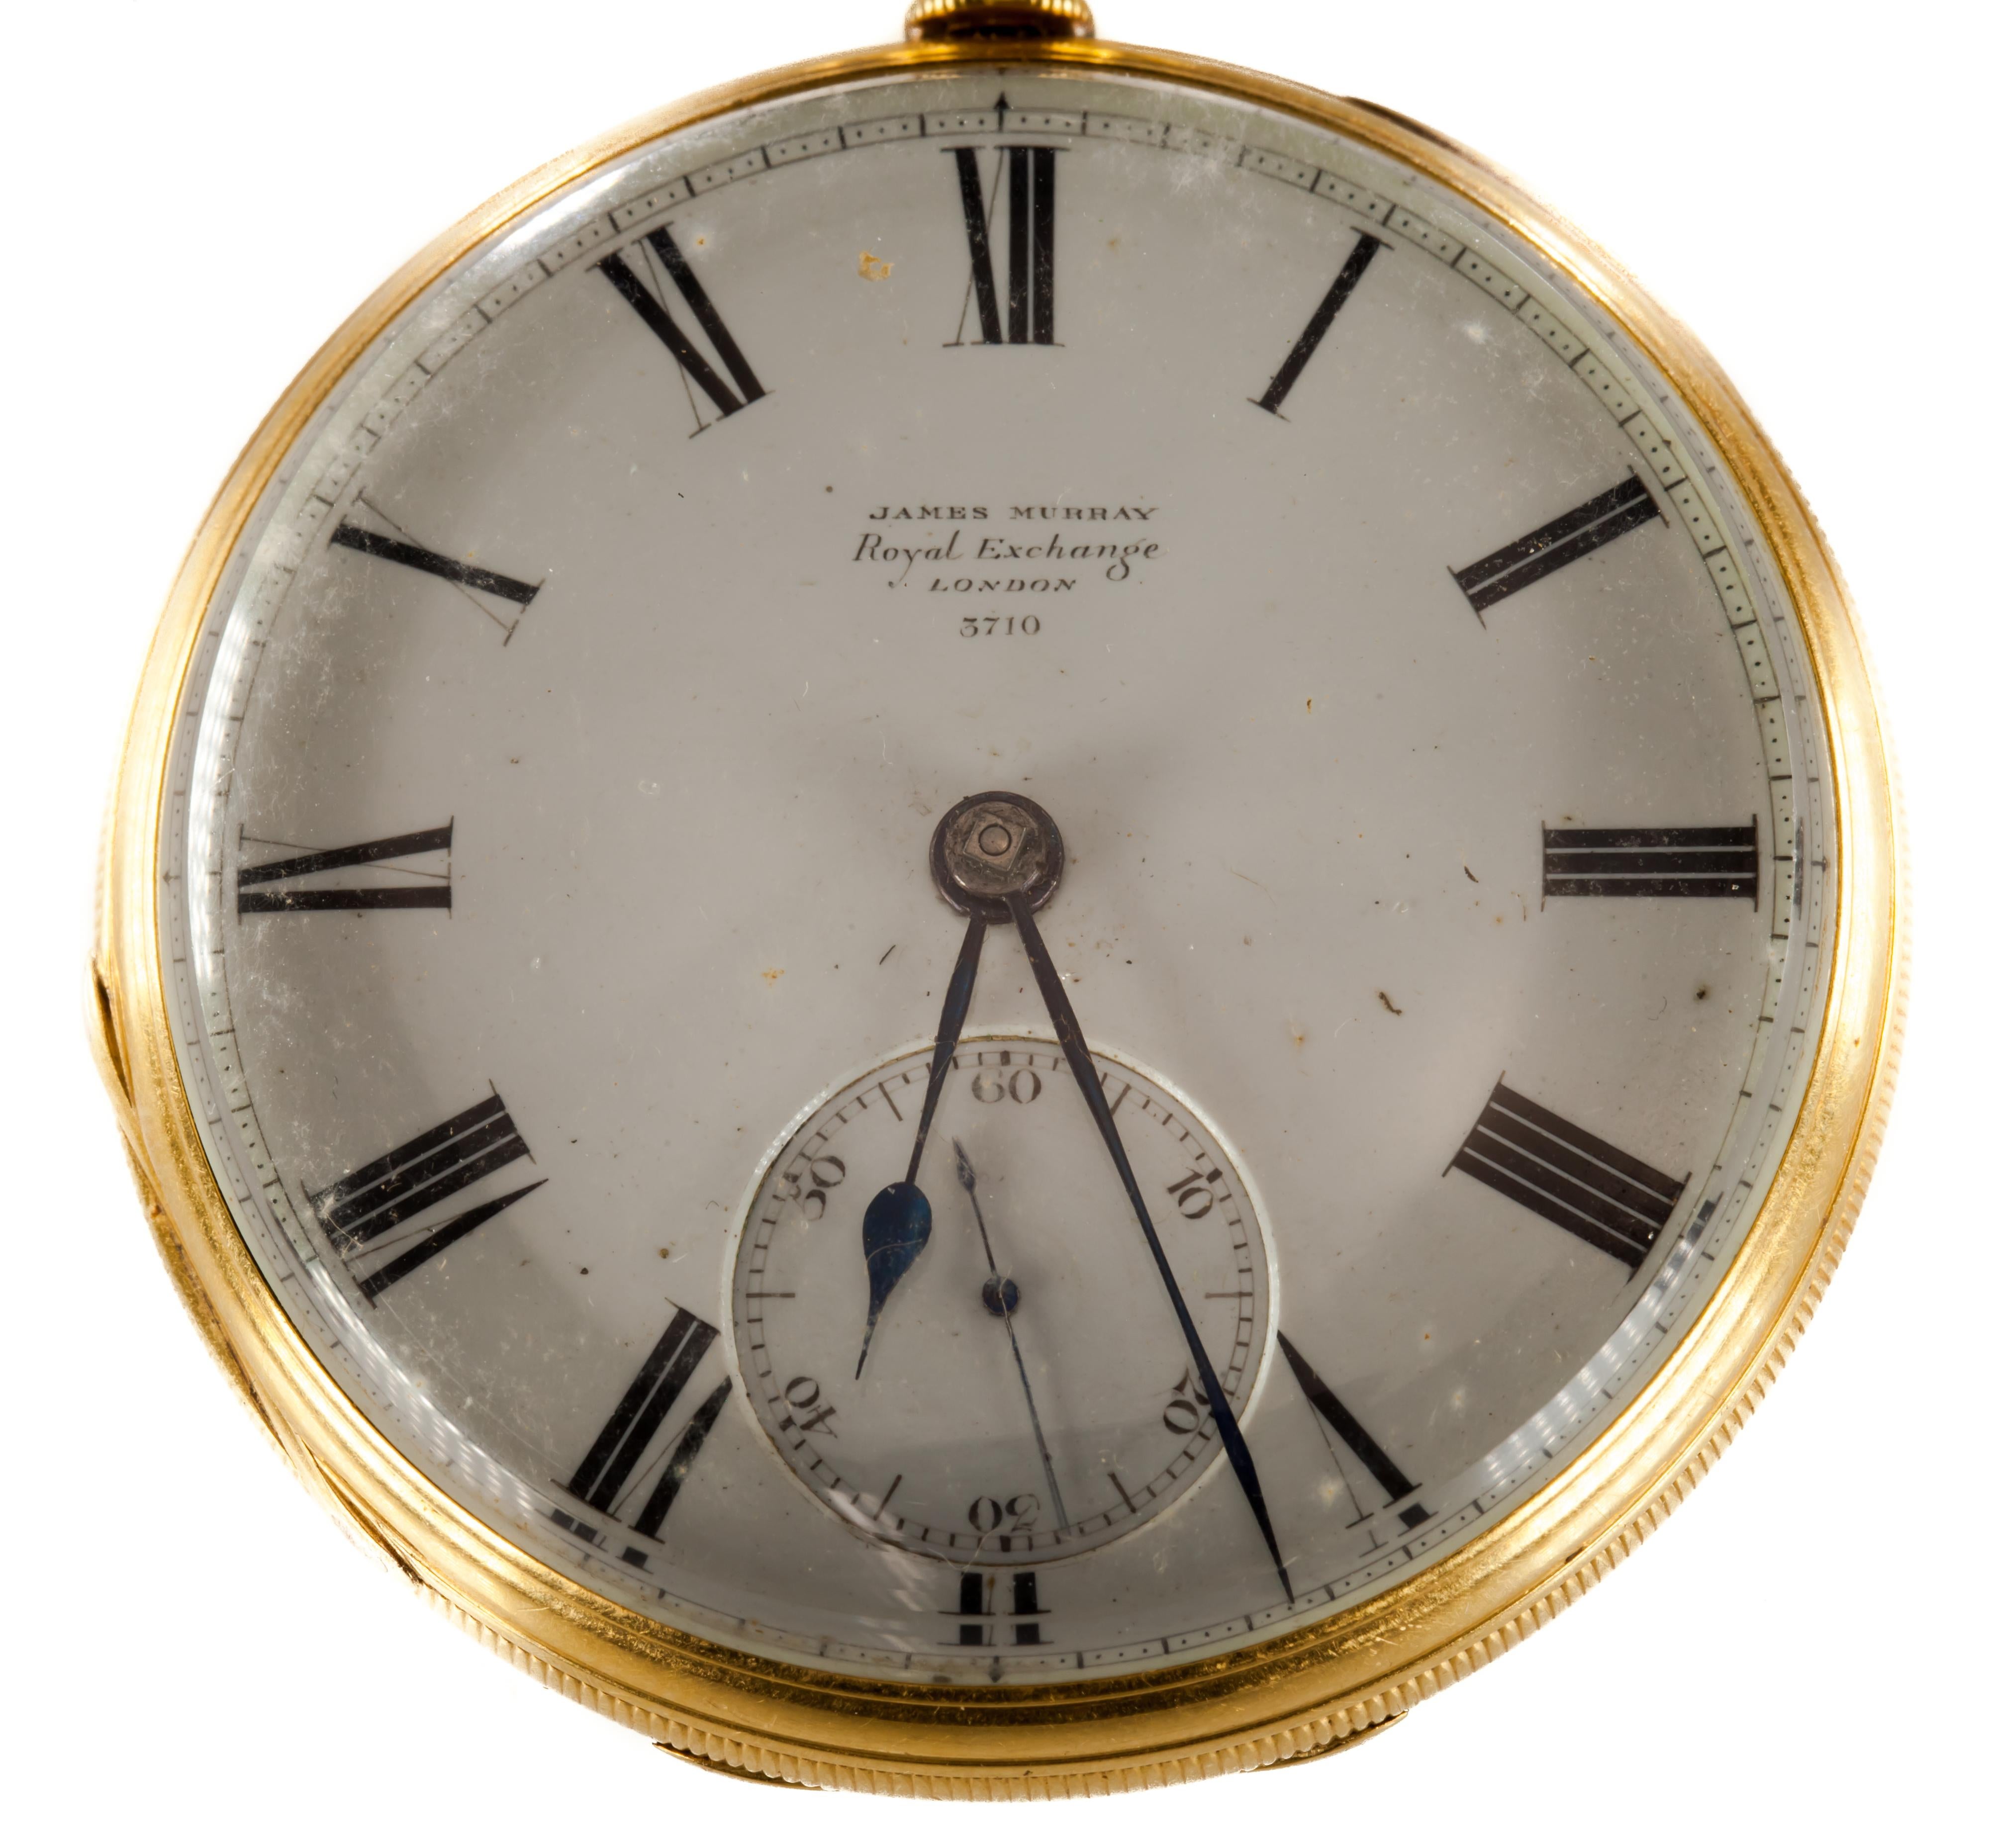 Gorgeous Pocket Watch by James Murray Royal Exchange
Key-Operated Movement (NOTE: Key is missing)
18k Yellow Gold Machine-Turned Case
46 mm in Diameter
15 mm Thick
Year of Manufacture: 1849
Total Mass = 103.2 grams
Gorgeous Antique Piece!